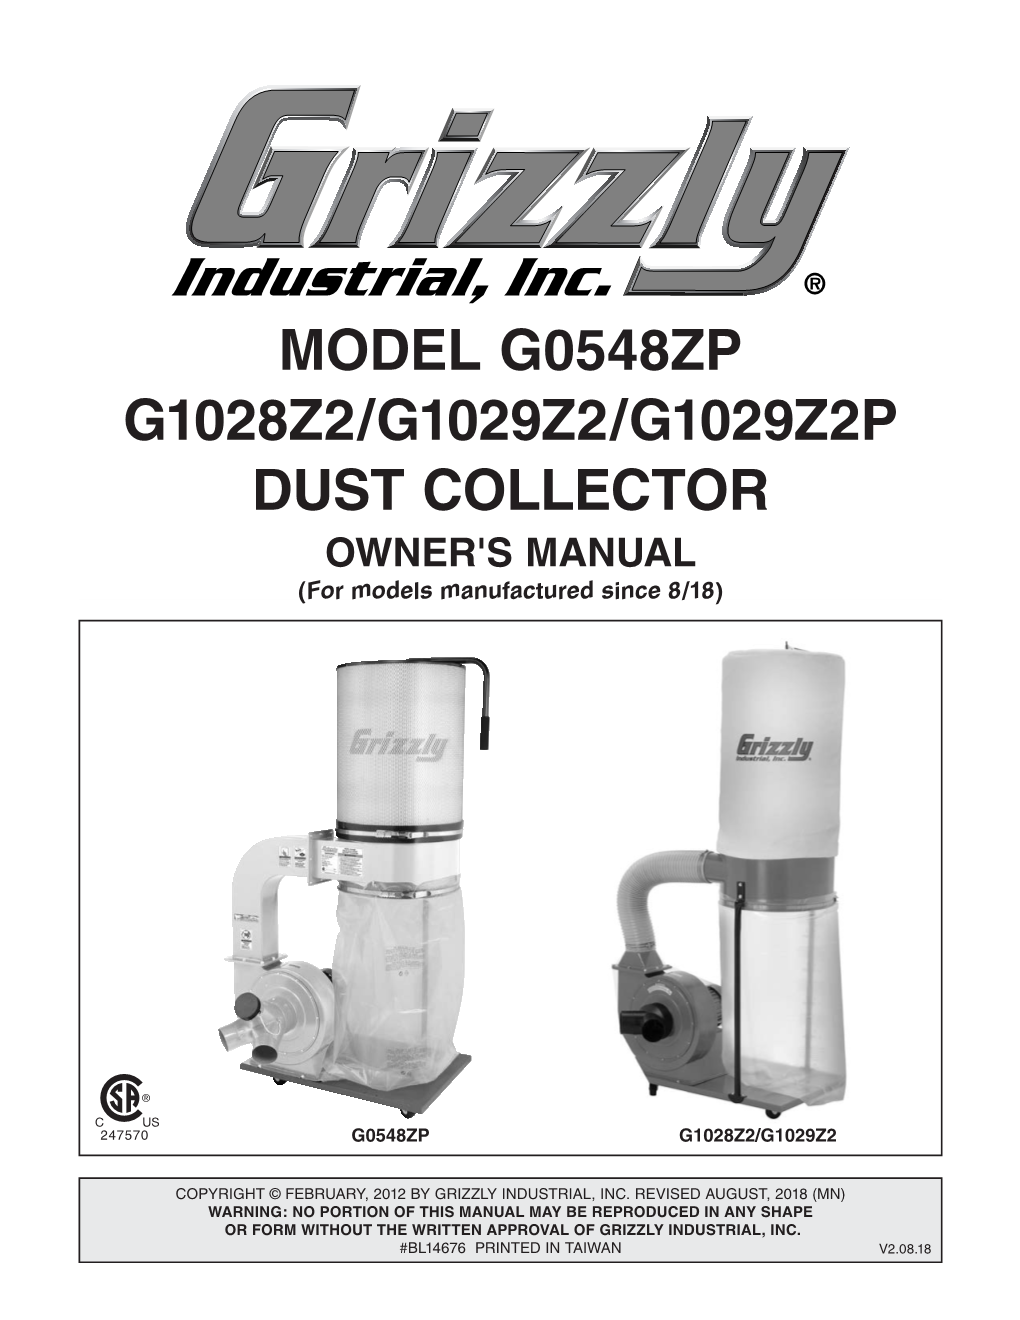 MODEL G0548ZP G1028Z2/G1029Z2/G1029Z2P DUST COLLECTOR OWNER's MANUAL (For Models Manufactured Since 8/18)